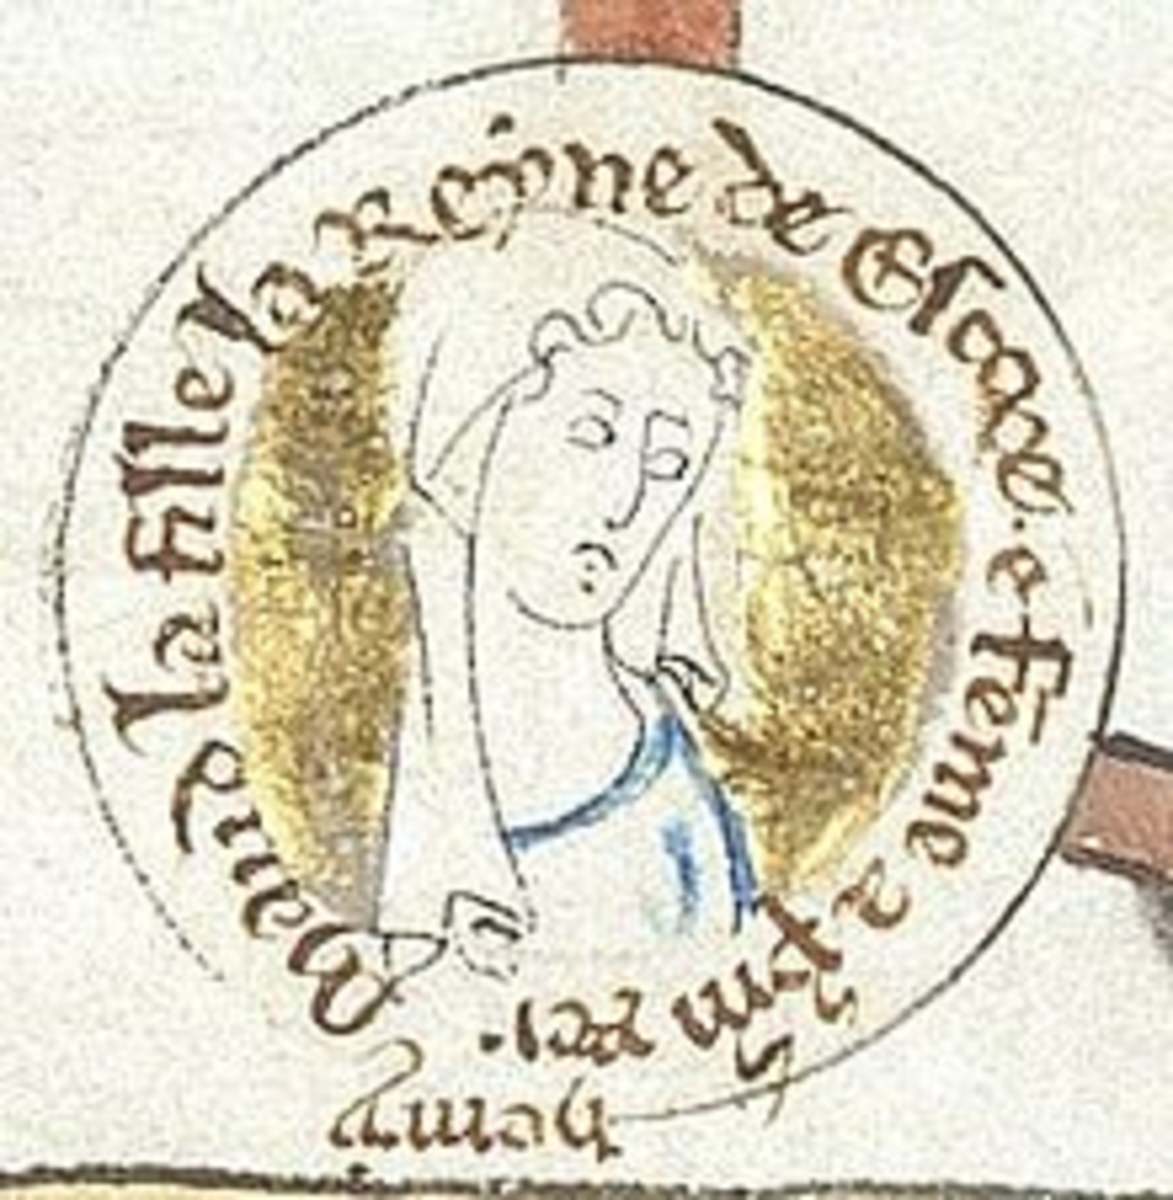 Matilda (Edith) of Scotland married Henry I of England in 1100.